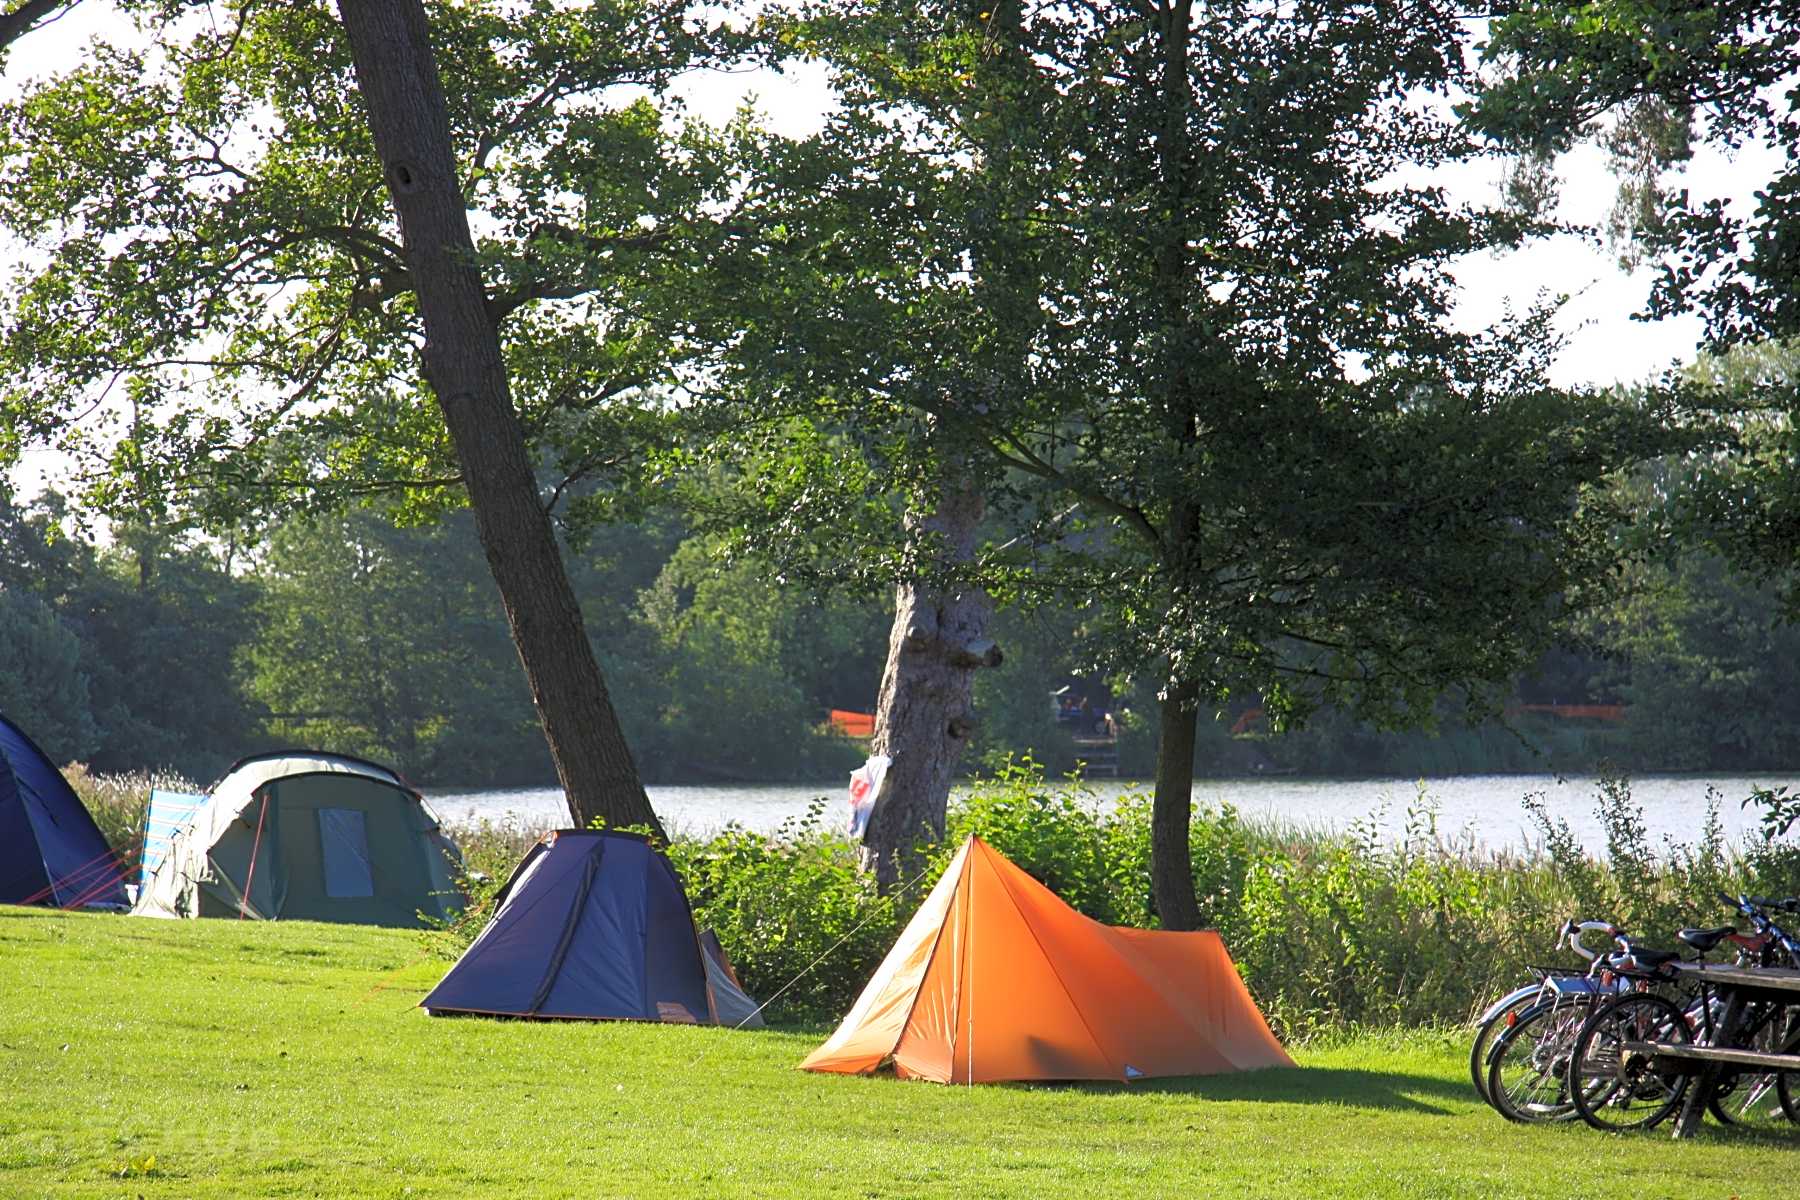 Campsites in Gosfield, Essex from £ 10/nt - Pitchup.